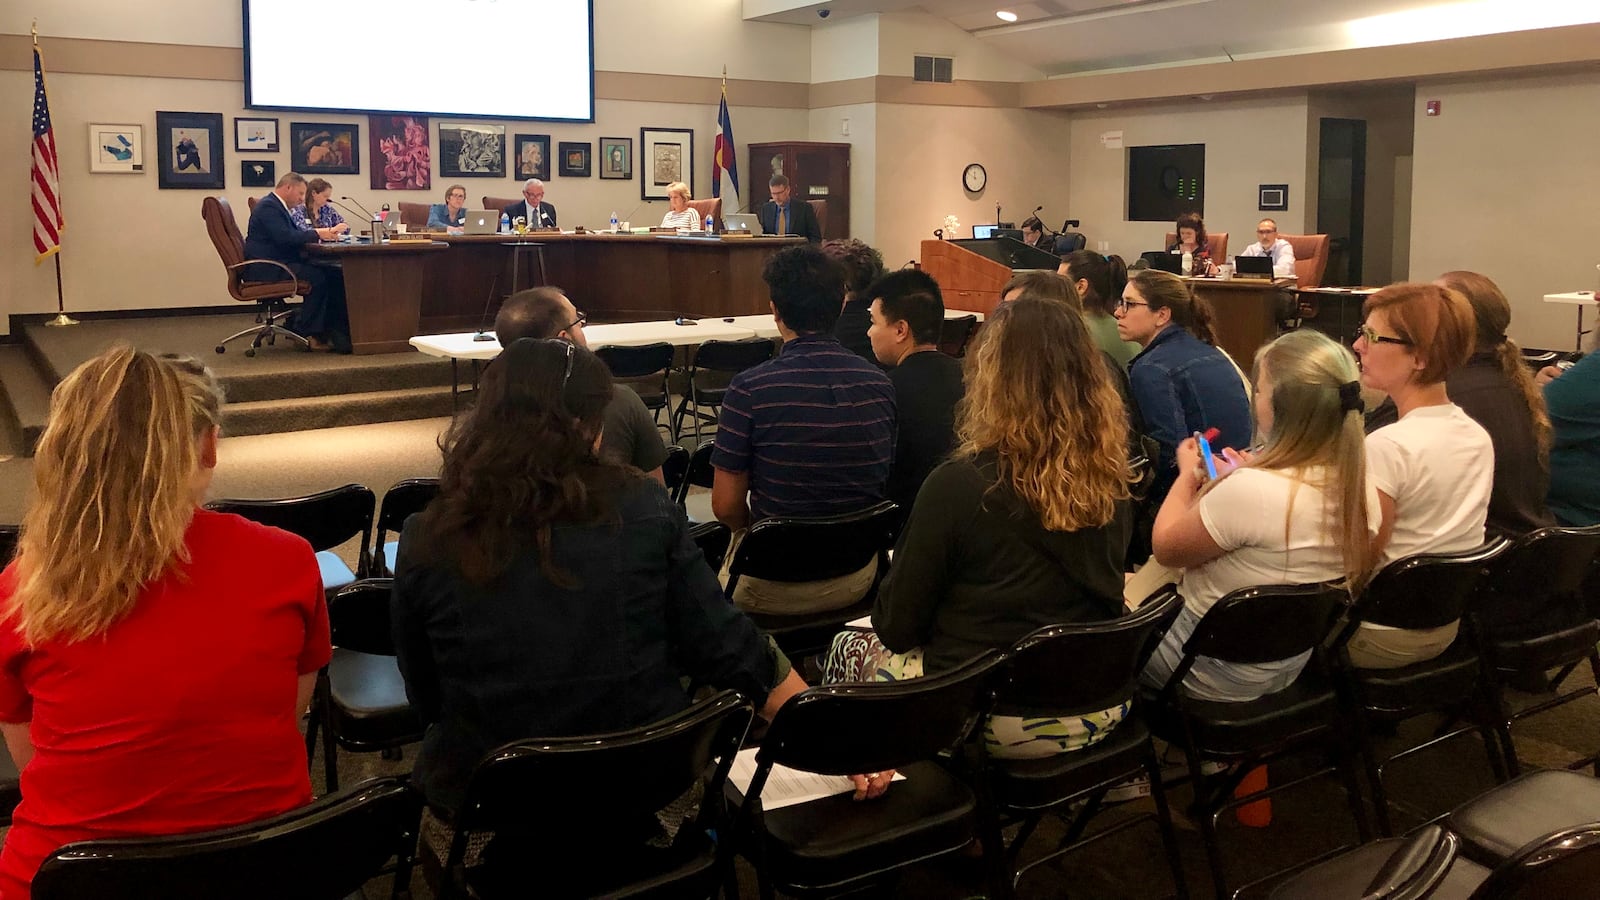 Some teachers, parents, and students wait to speak in favor of updating LGBTQ policies at the Jefferson County School Board meeting Thursday.